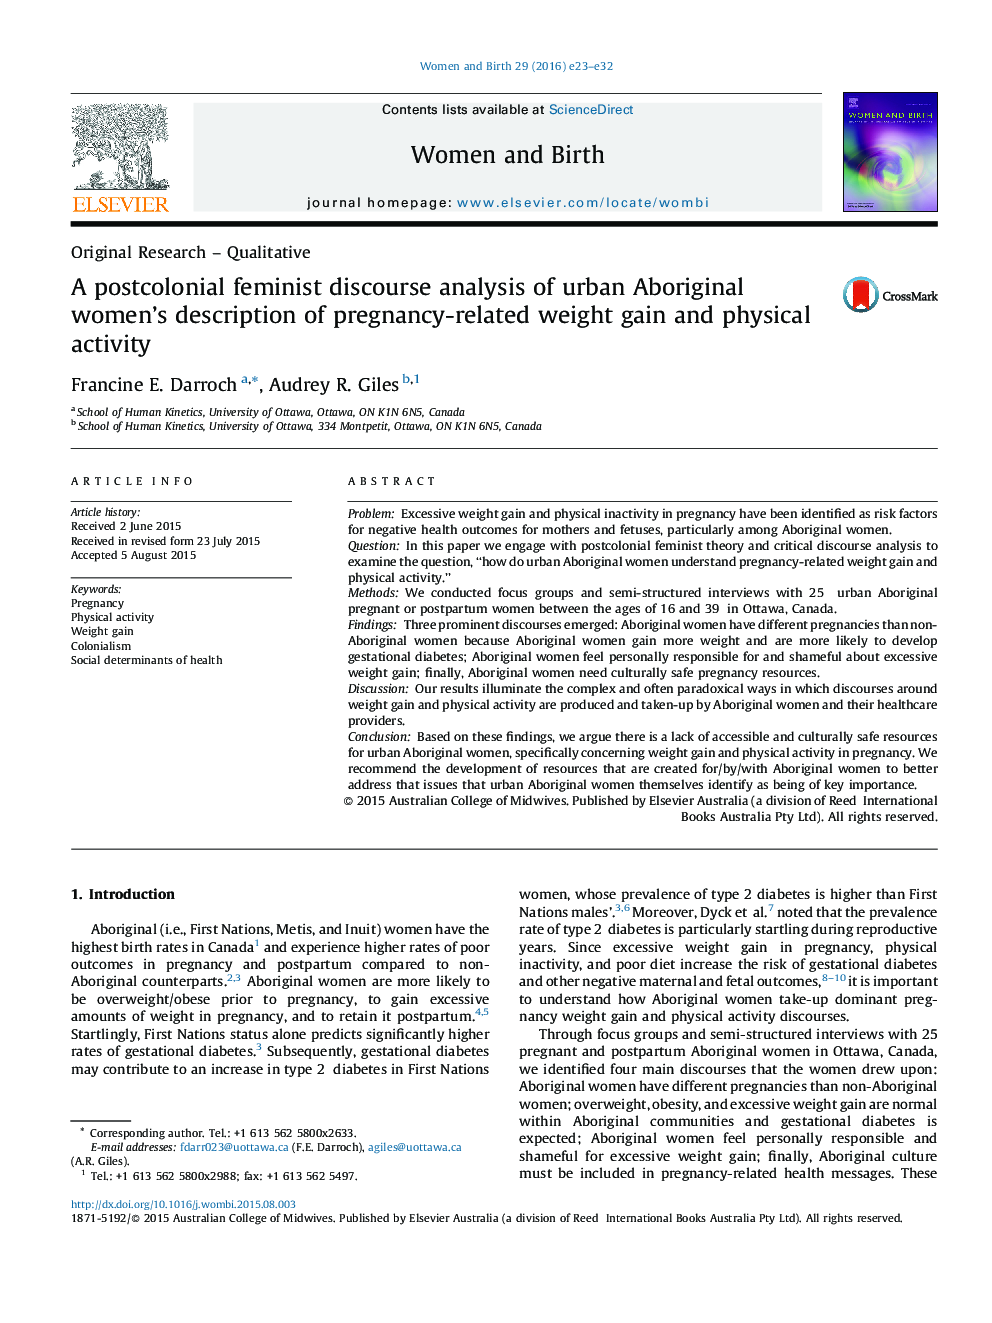 A postcolonial feminist discourse analysis of urban Aboriginal women's description of pregnancy-related weight gain and physical activity